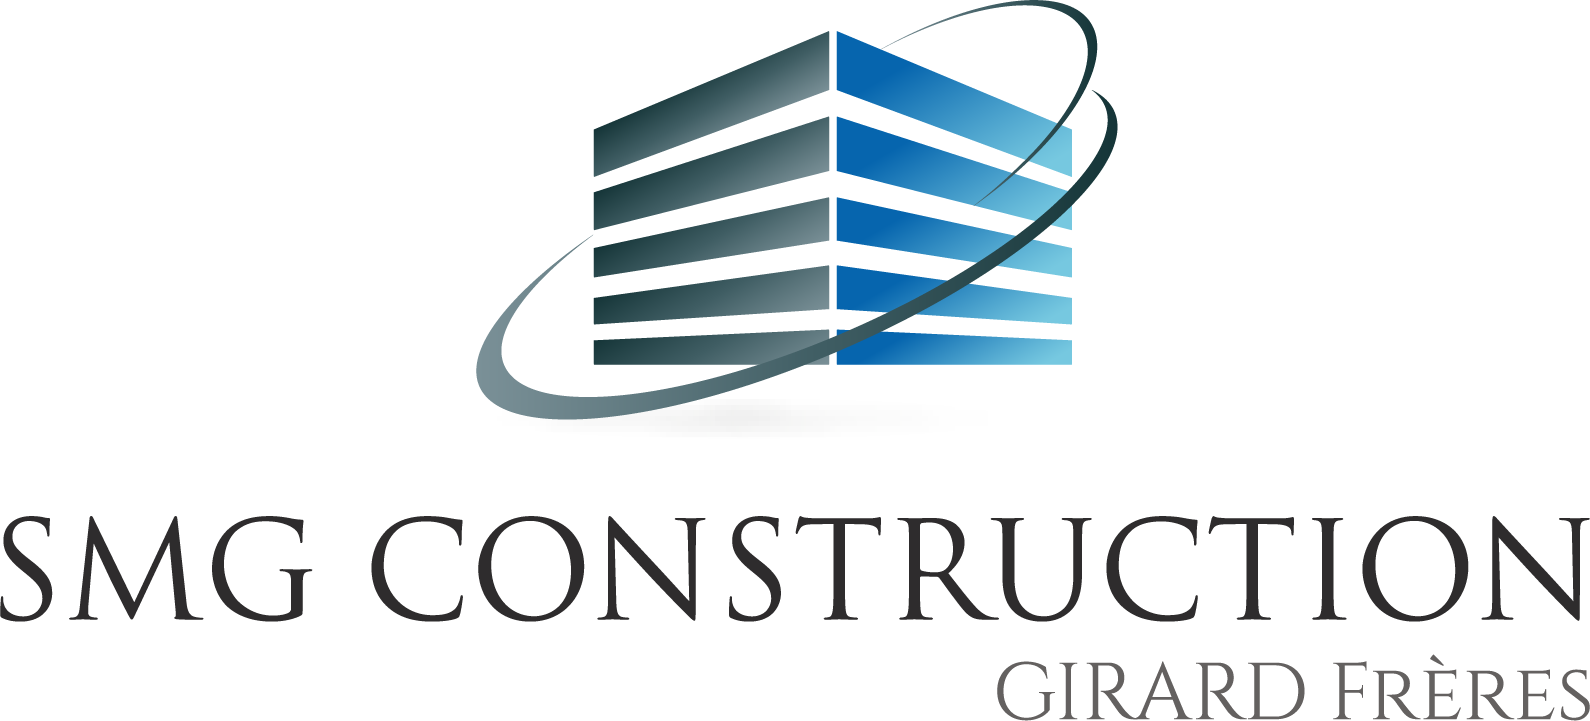 SMG_CONSTRUCTION